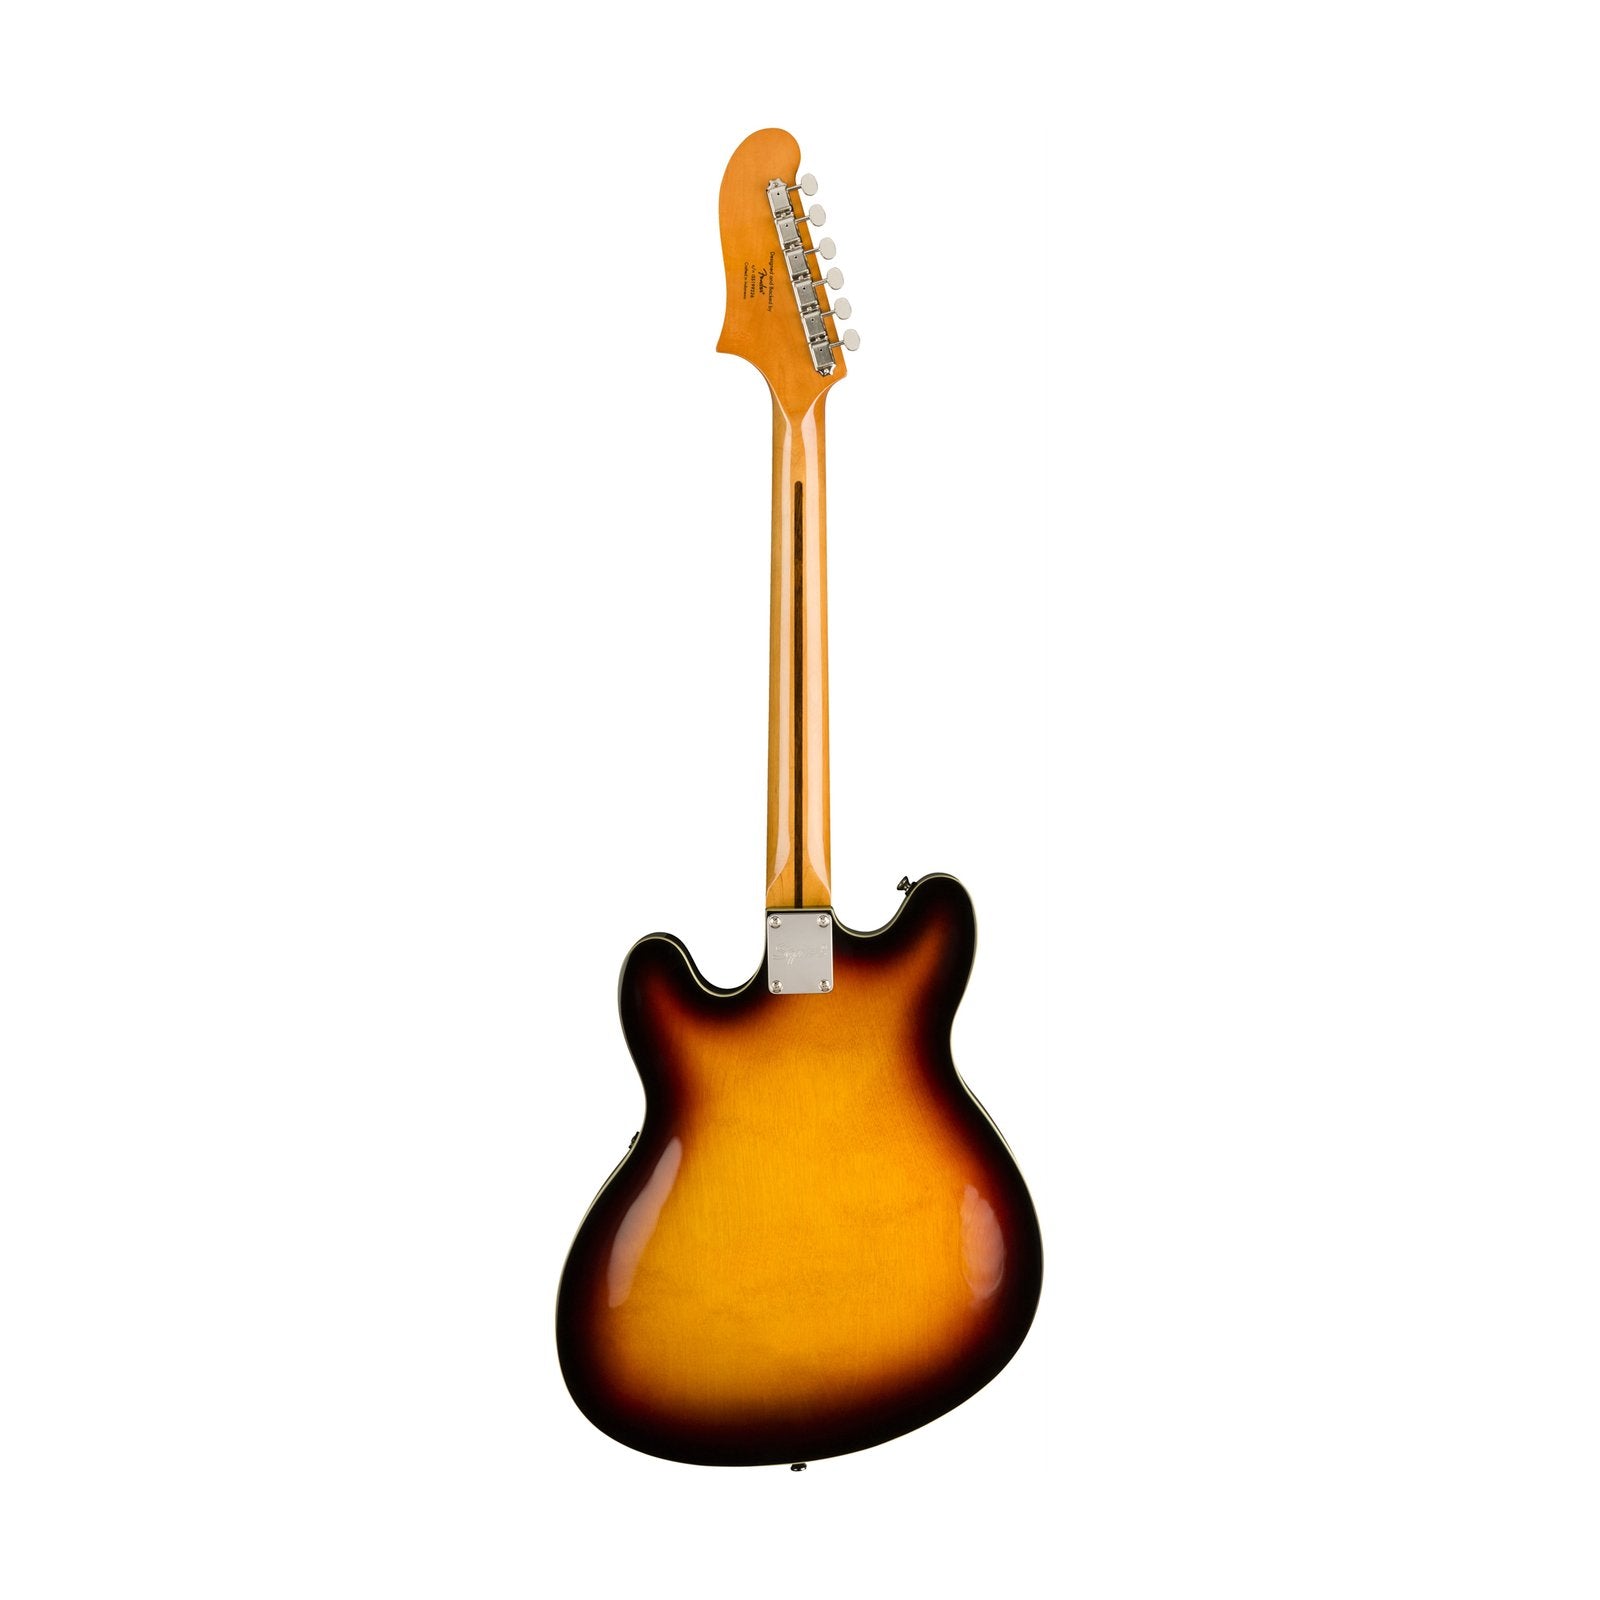 Squier Classic Vibe Starcaster Electric Guitar, Maple FB, 3-Tone Sunburst, SQUIER BY FENDER, ELECTRIC GUITAR, squier-by-fender-electric-guitar-037-4590-500, ZOSO MUSIC SDN BHD